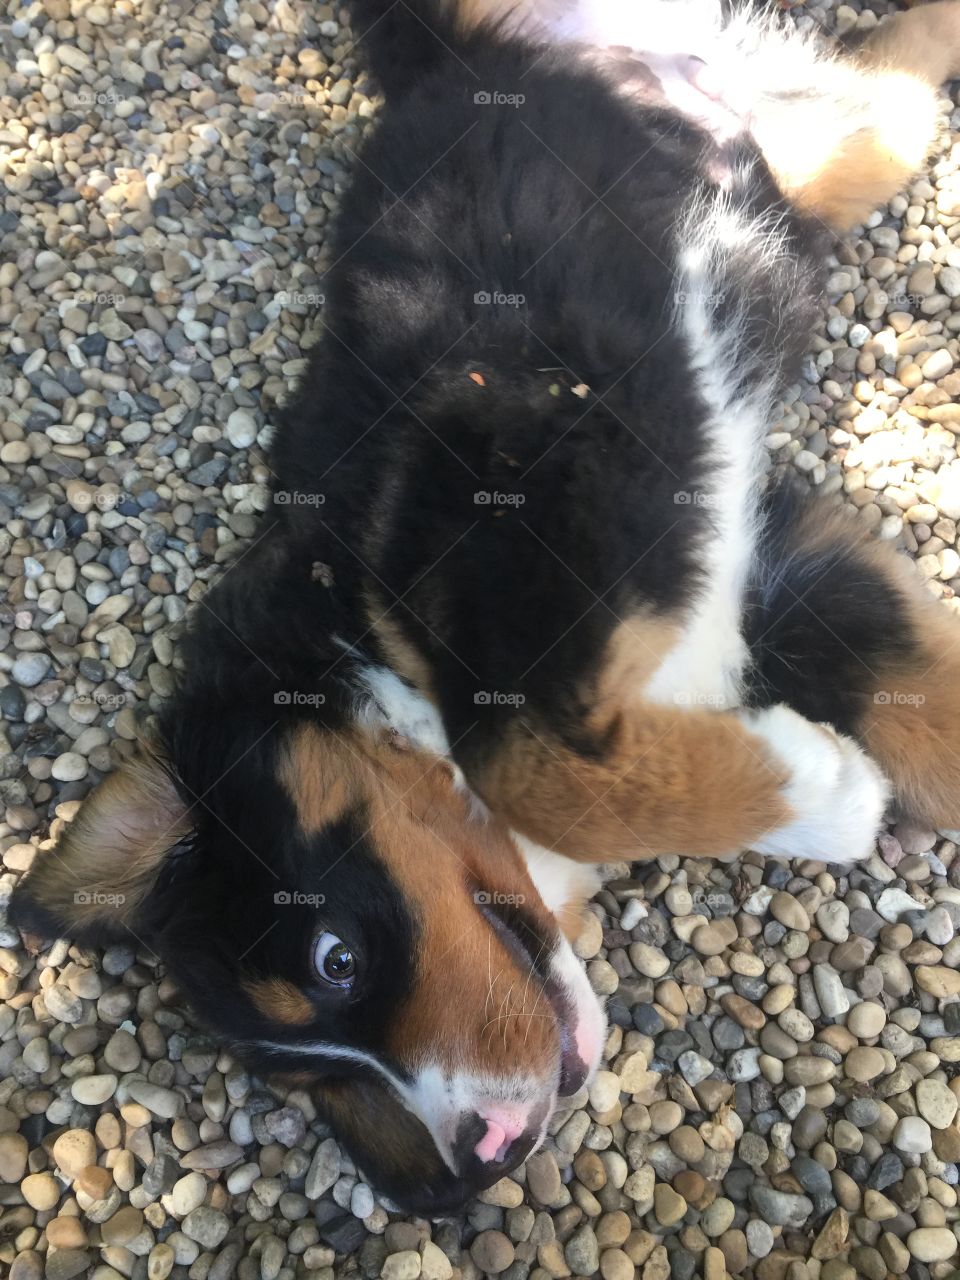 Bernese Mountain dog puppy having a roll in the rocks!